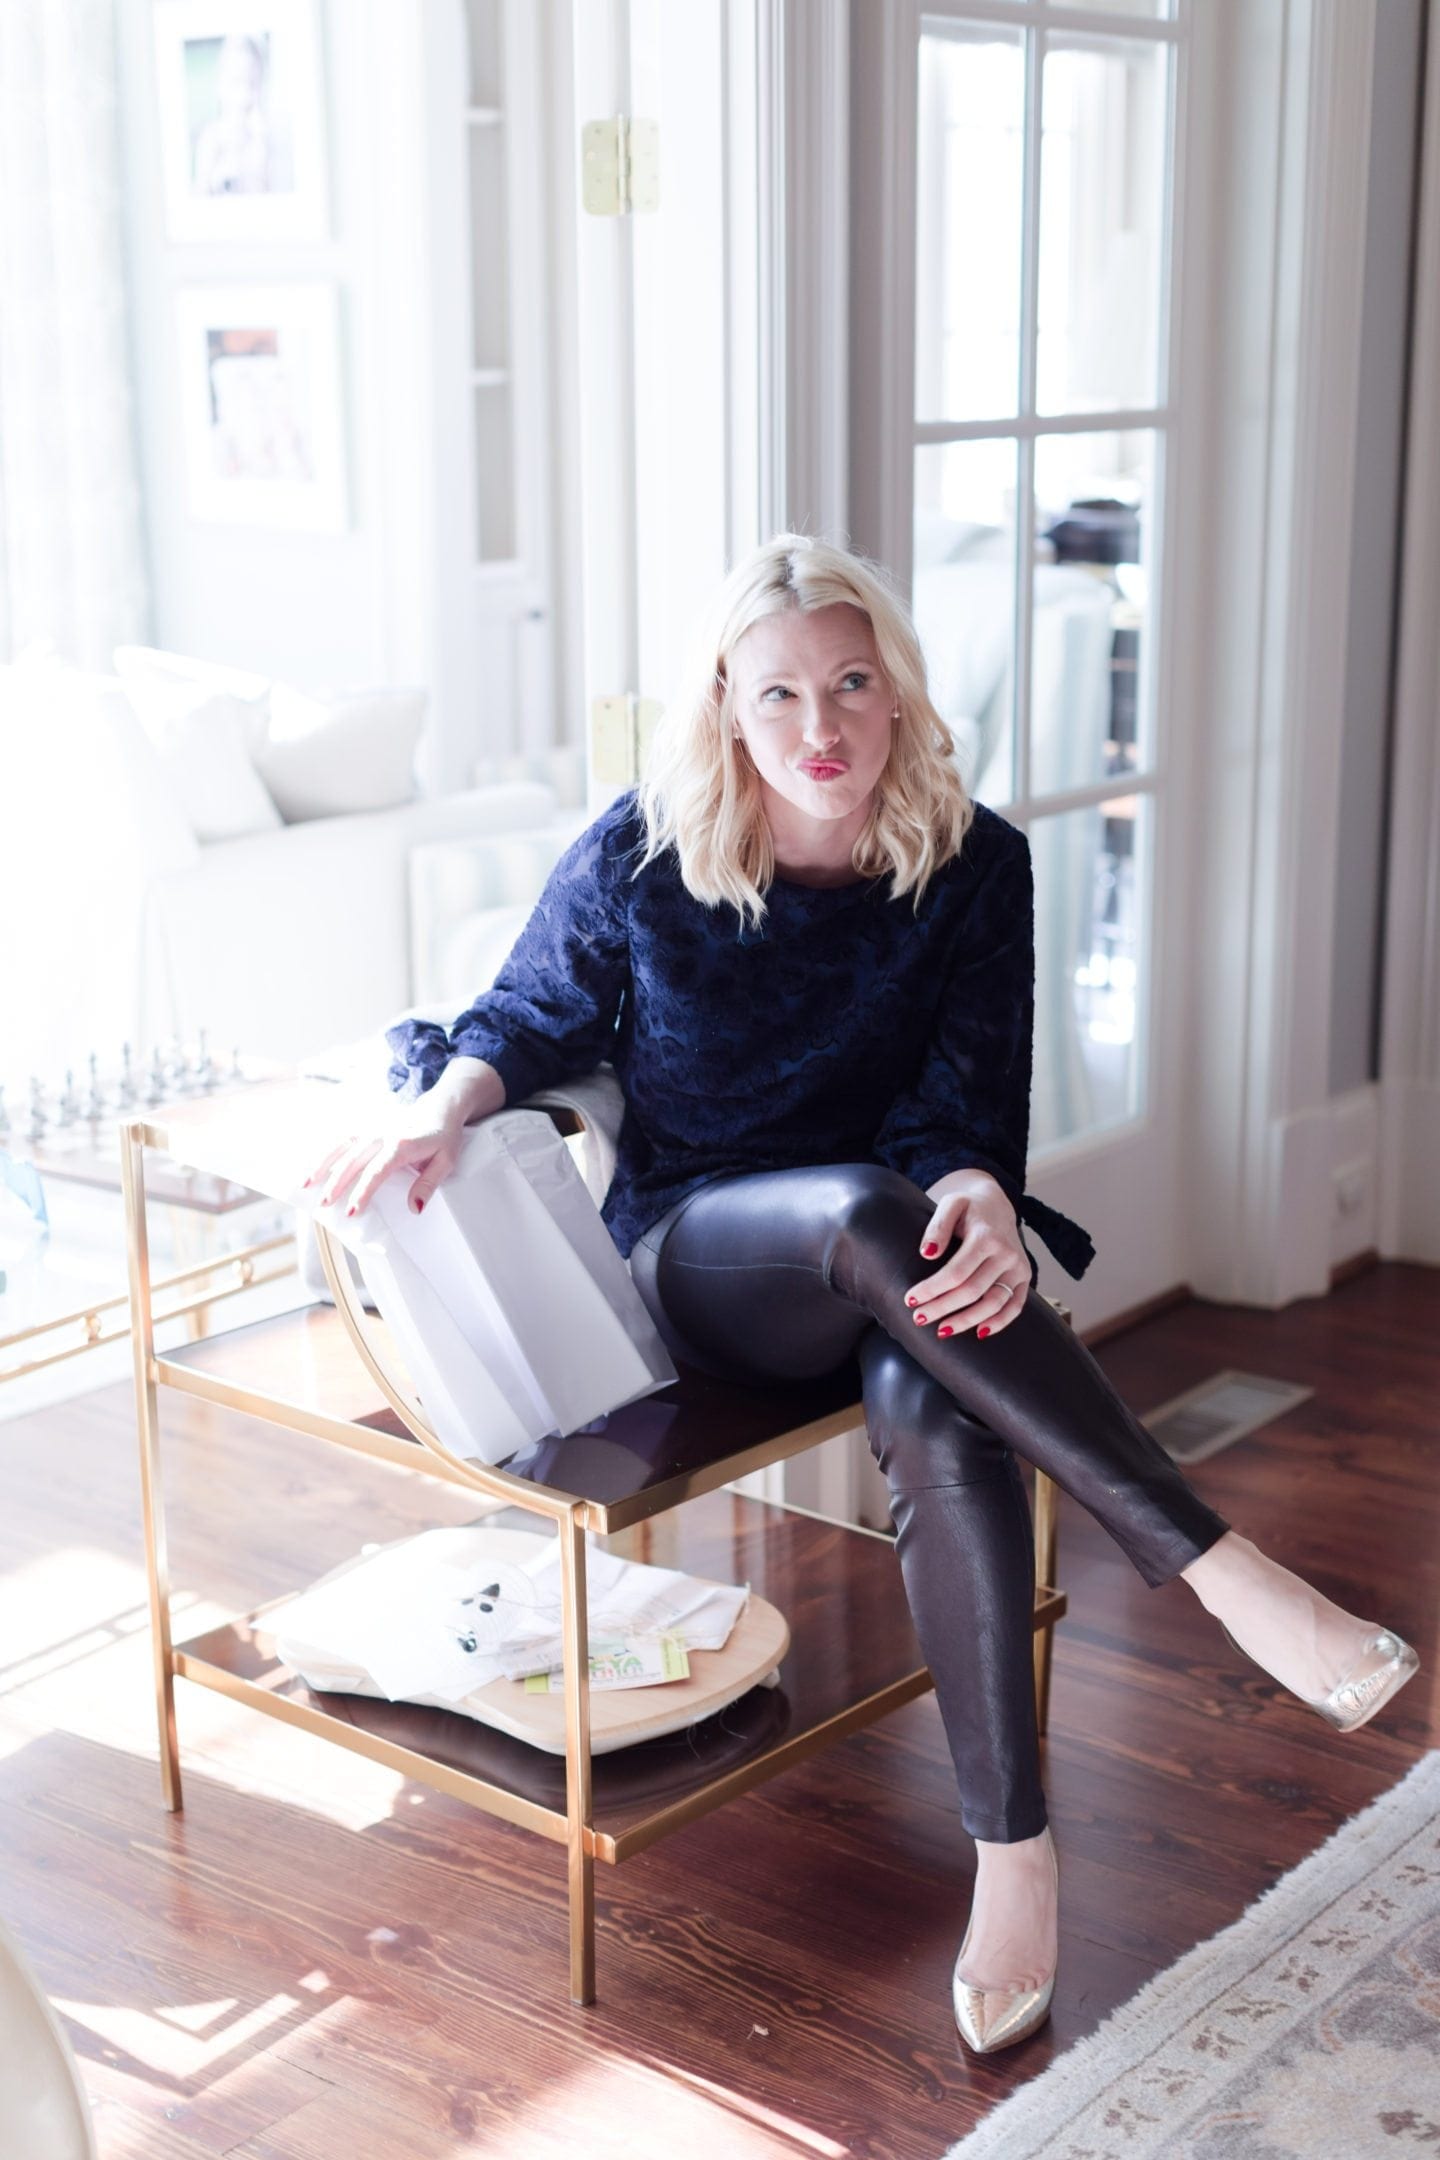 Do you find lifestyle bloggers funny? Me too. Me in leather pants, heals. 